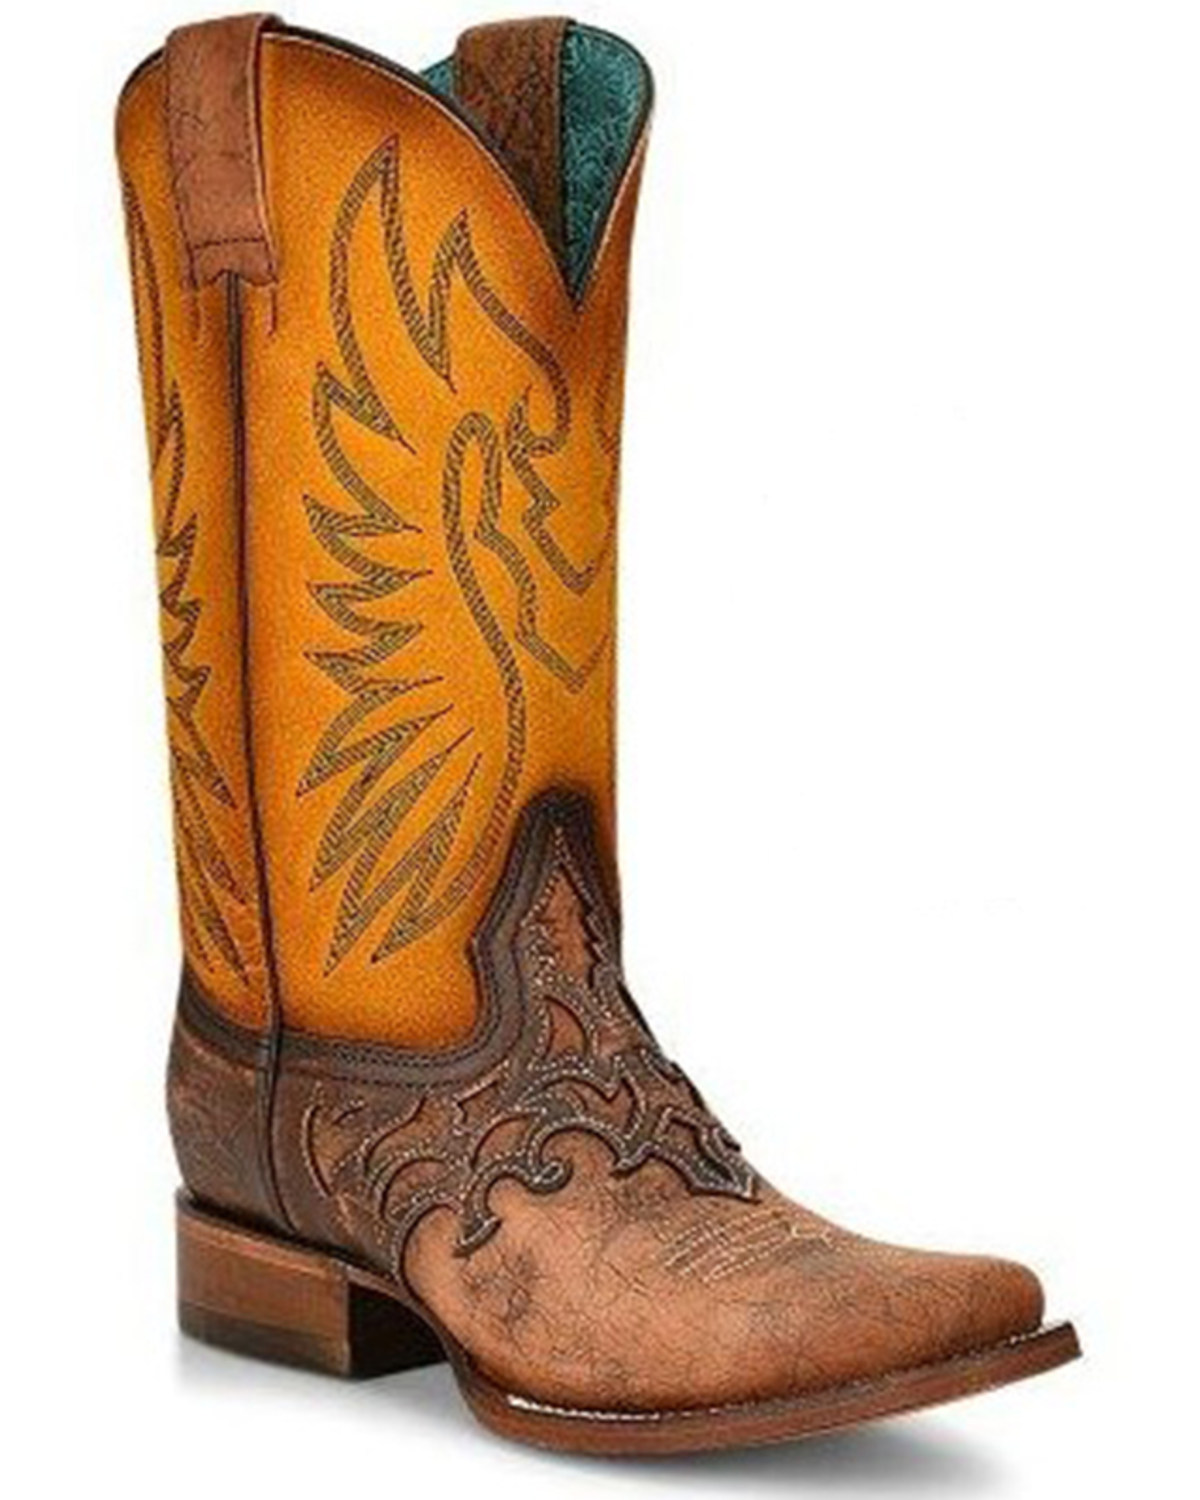 Corral Women's Inlay Western Boots - Square Toe